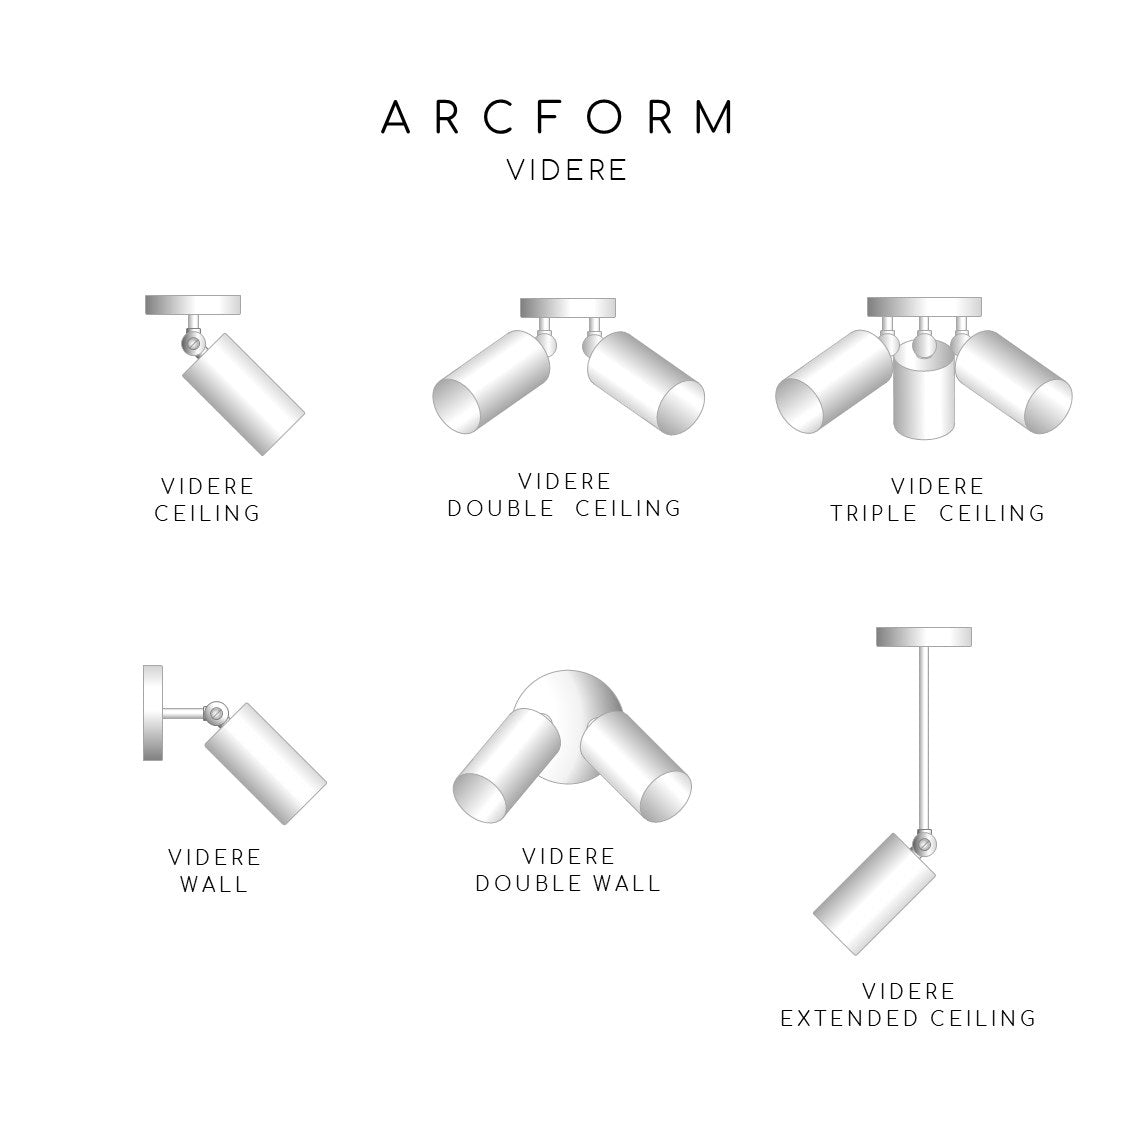 The Arcform VIDERE range includes ceiling, double ceiling, triple ceiling, wall, double wall and extended ceiling lights